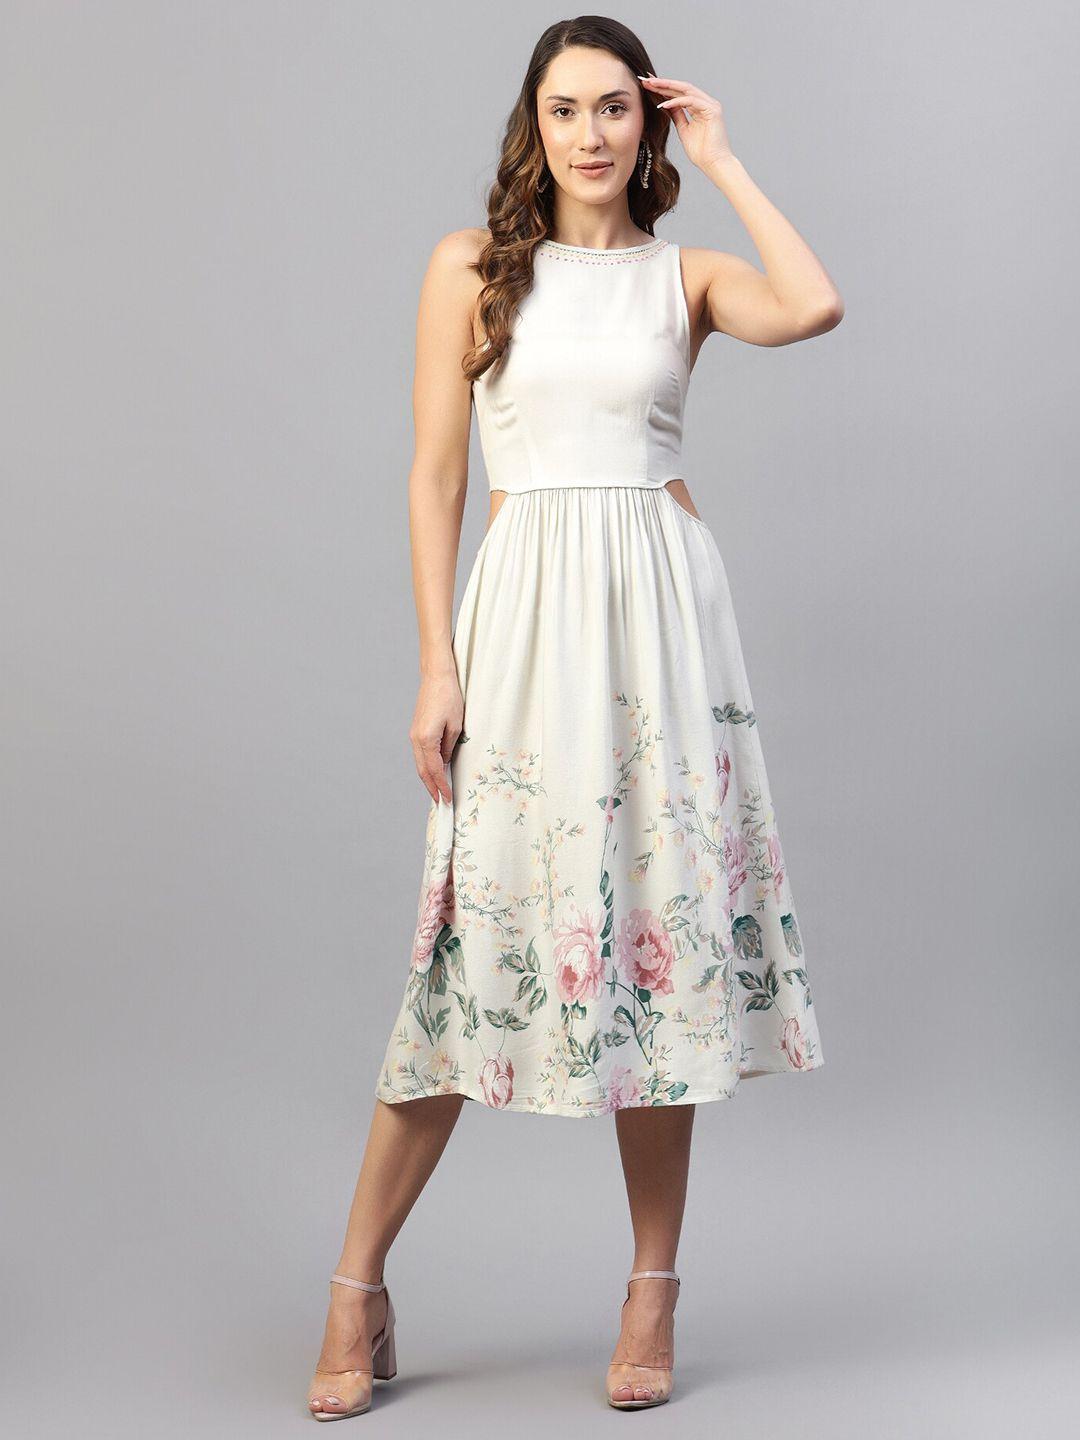 hencemade-floral-printed-cut-outs-cotton-fit-&-flare-midi-dress